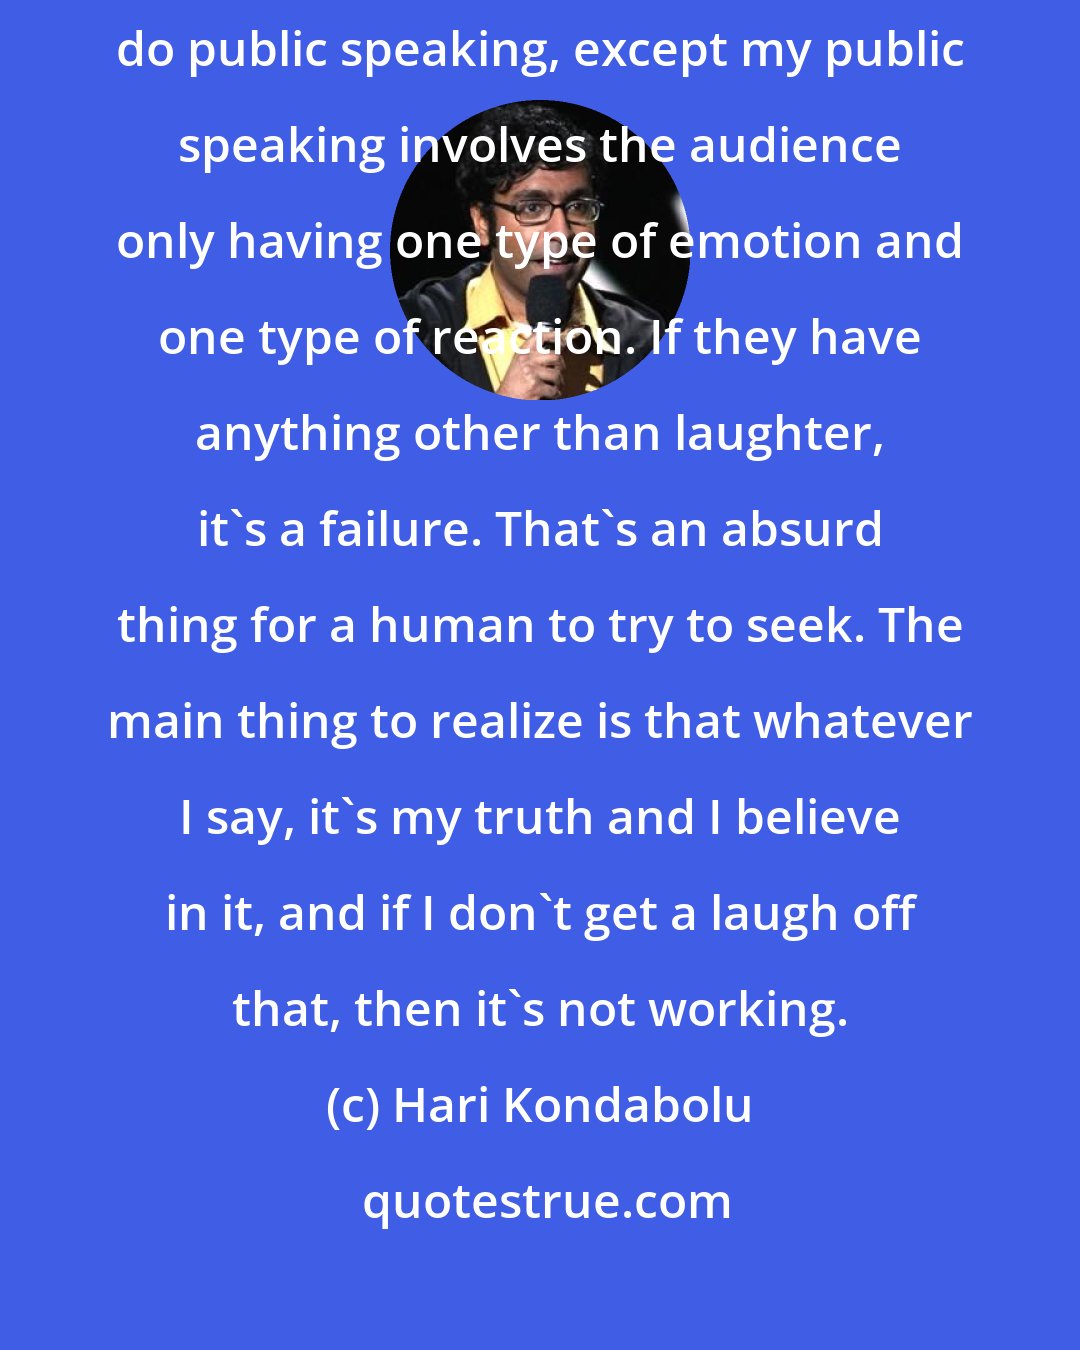 Hari Kondabolu: It's a sick thing, right: people are afraid of public speaking. I do public speaking, except my public speaking involves the audience only having one type of emotion and one type of reaction. If they have anything other than laughter, it's a failure. That's an absurd thing for a human to try to seek. The main thing to realize is that whatever I say, it's my truth and I believe in it, and if I don't get a laugh off that, then it's not working.